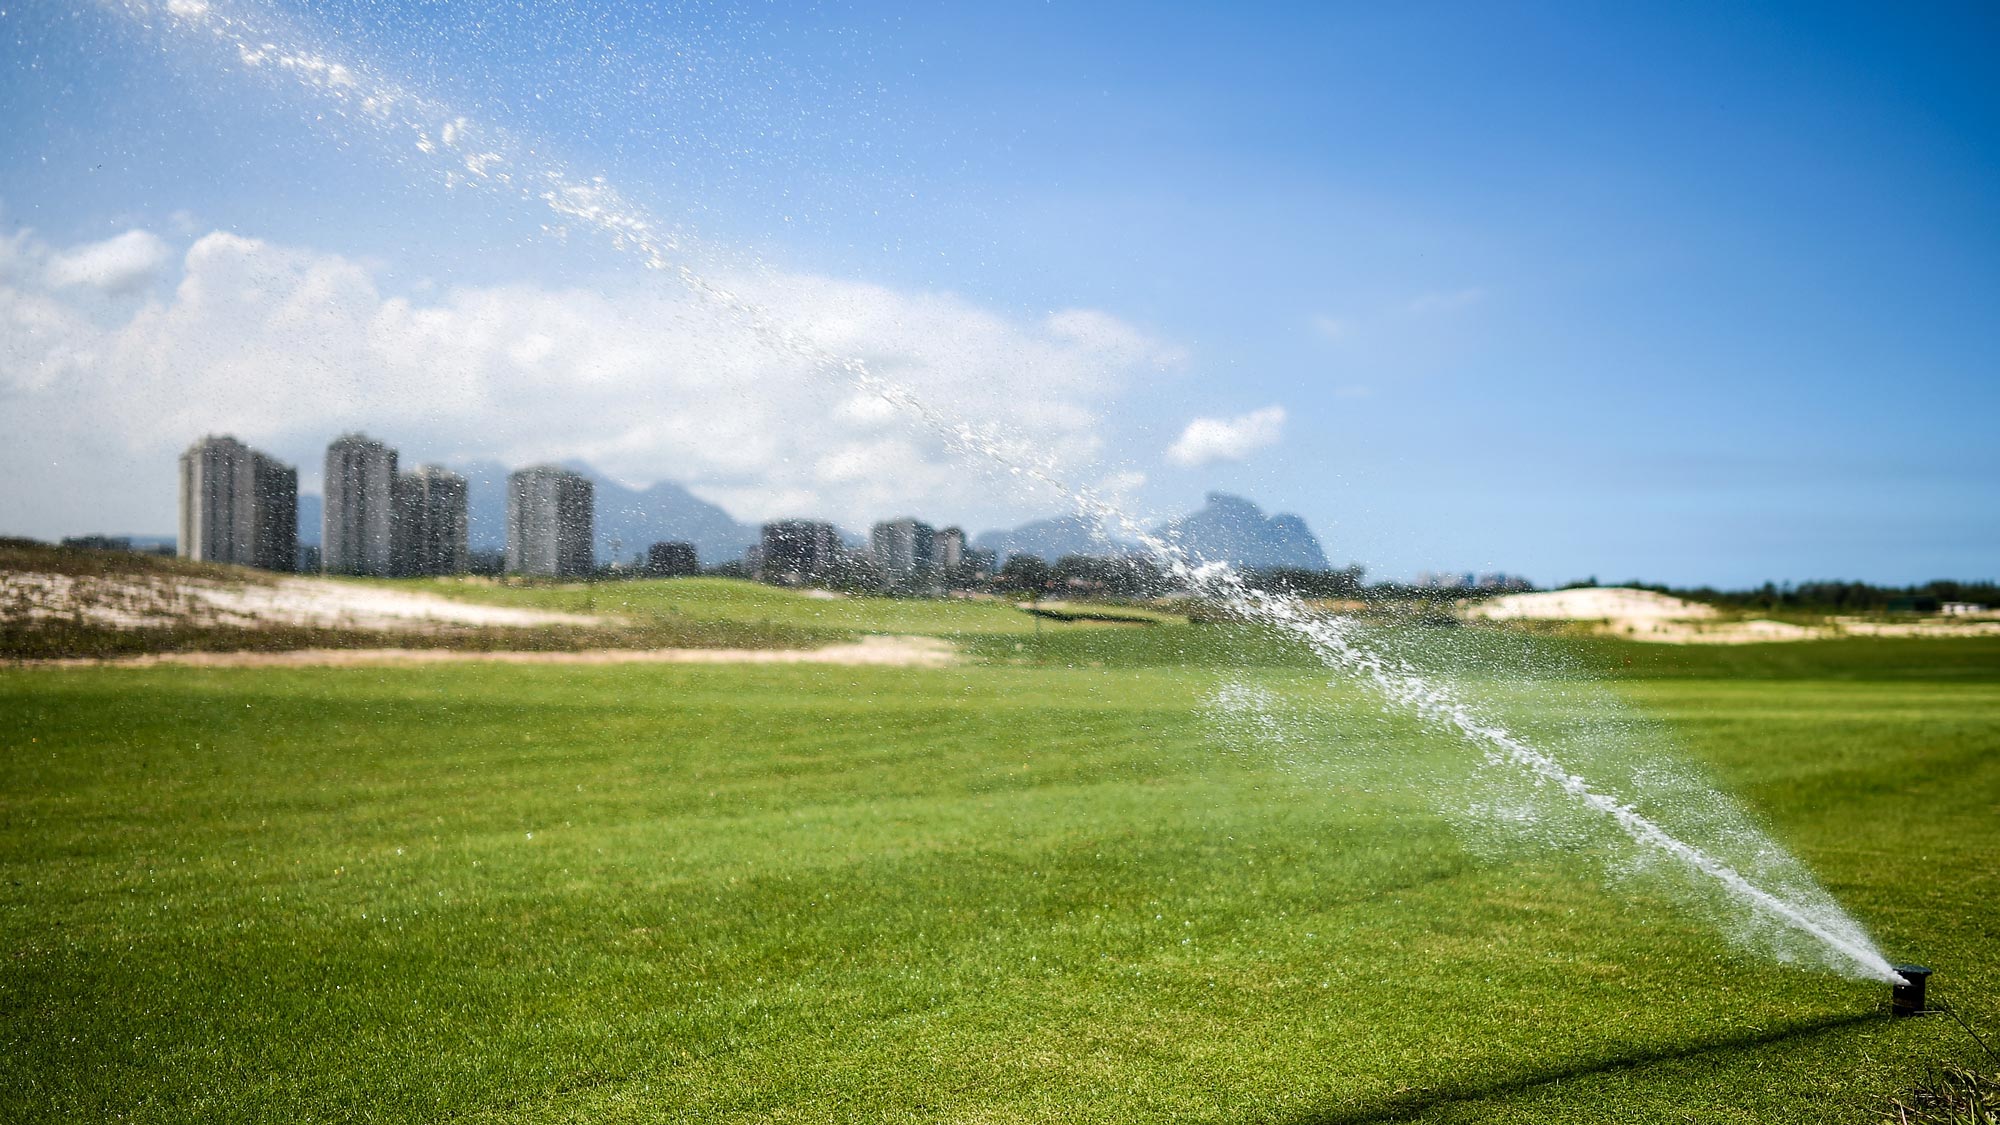 General view of the golf course for the Rio 2016 Olympic Games in the Barra da Tijuca neighborhood on July 6, 2015 in Rio de Janeiro, Brazil